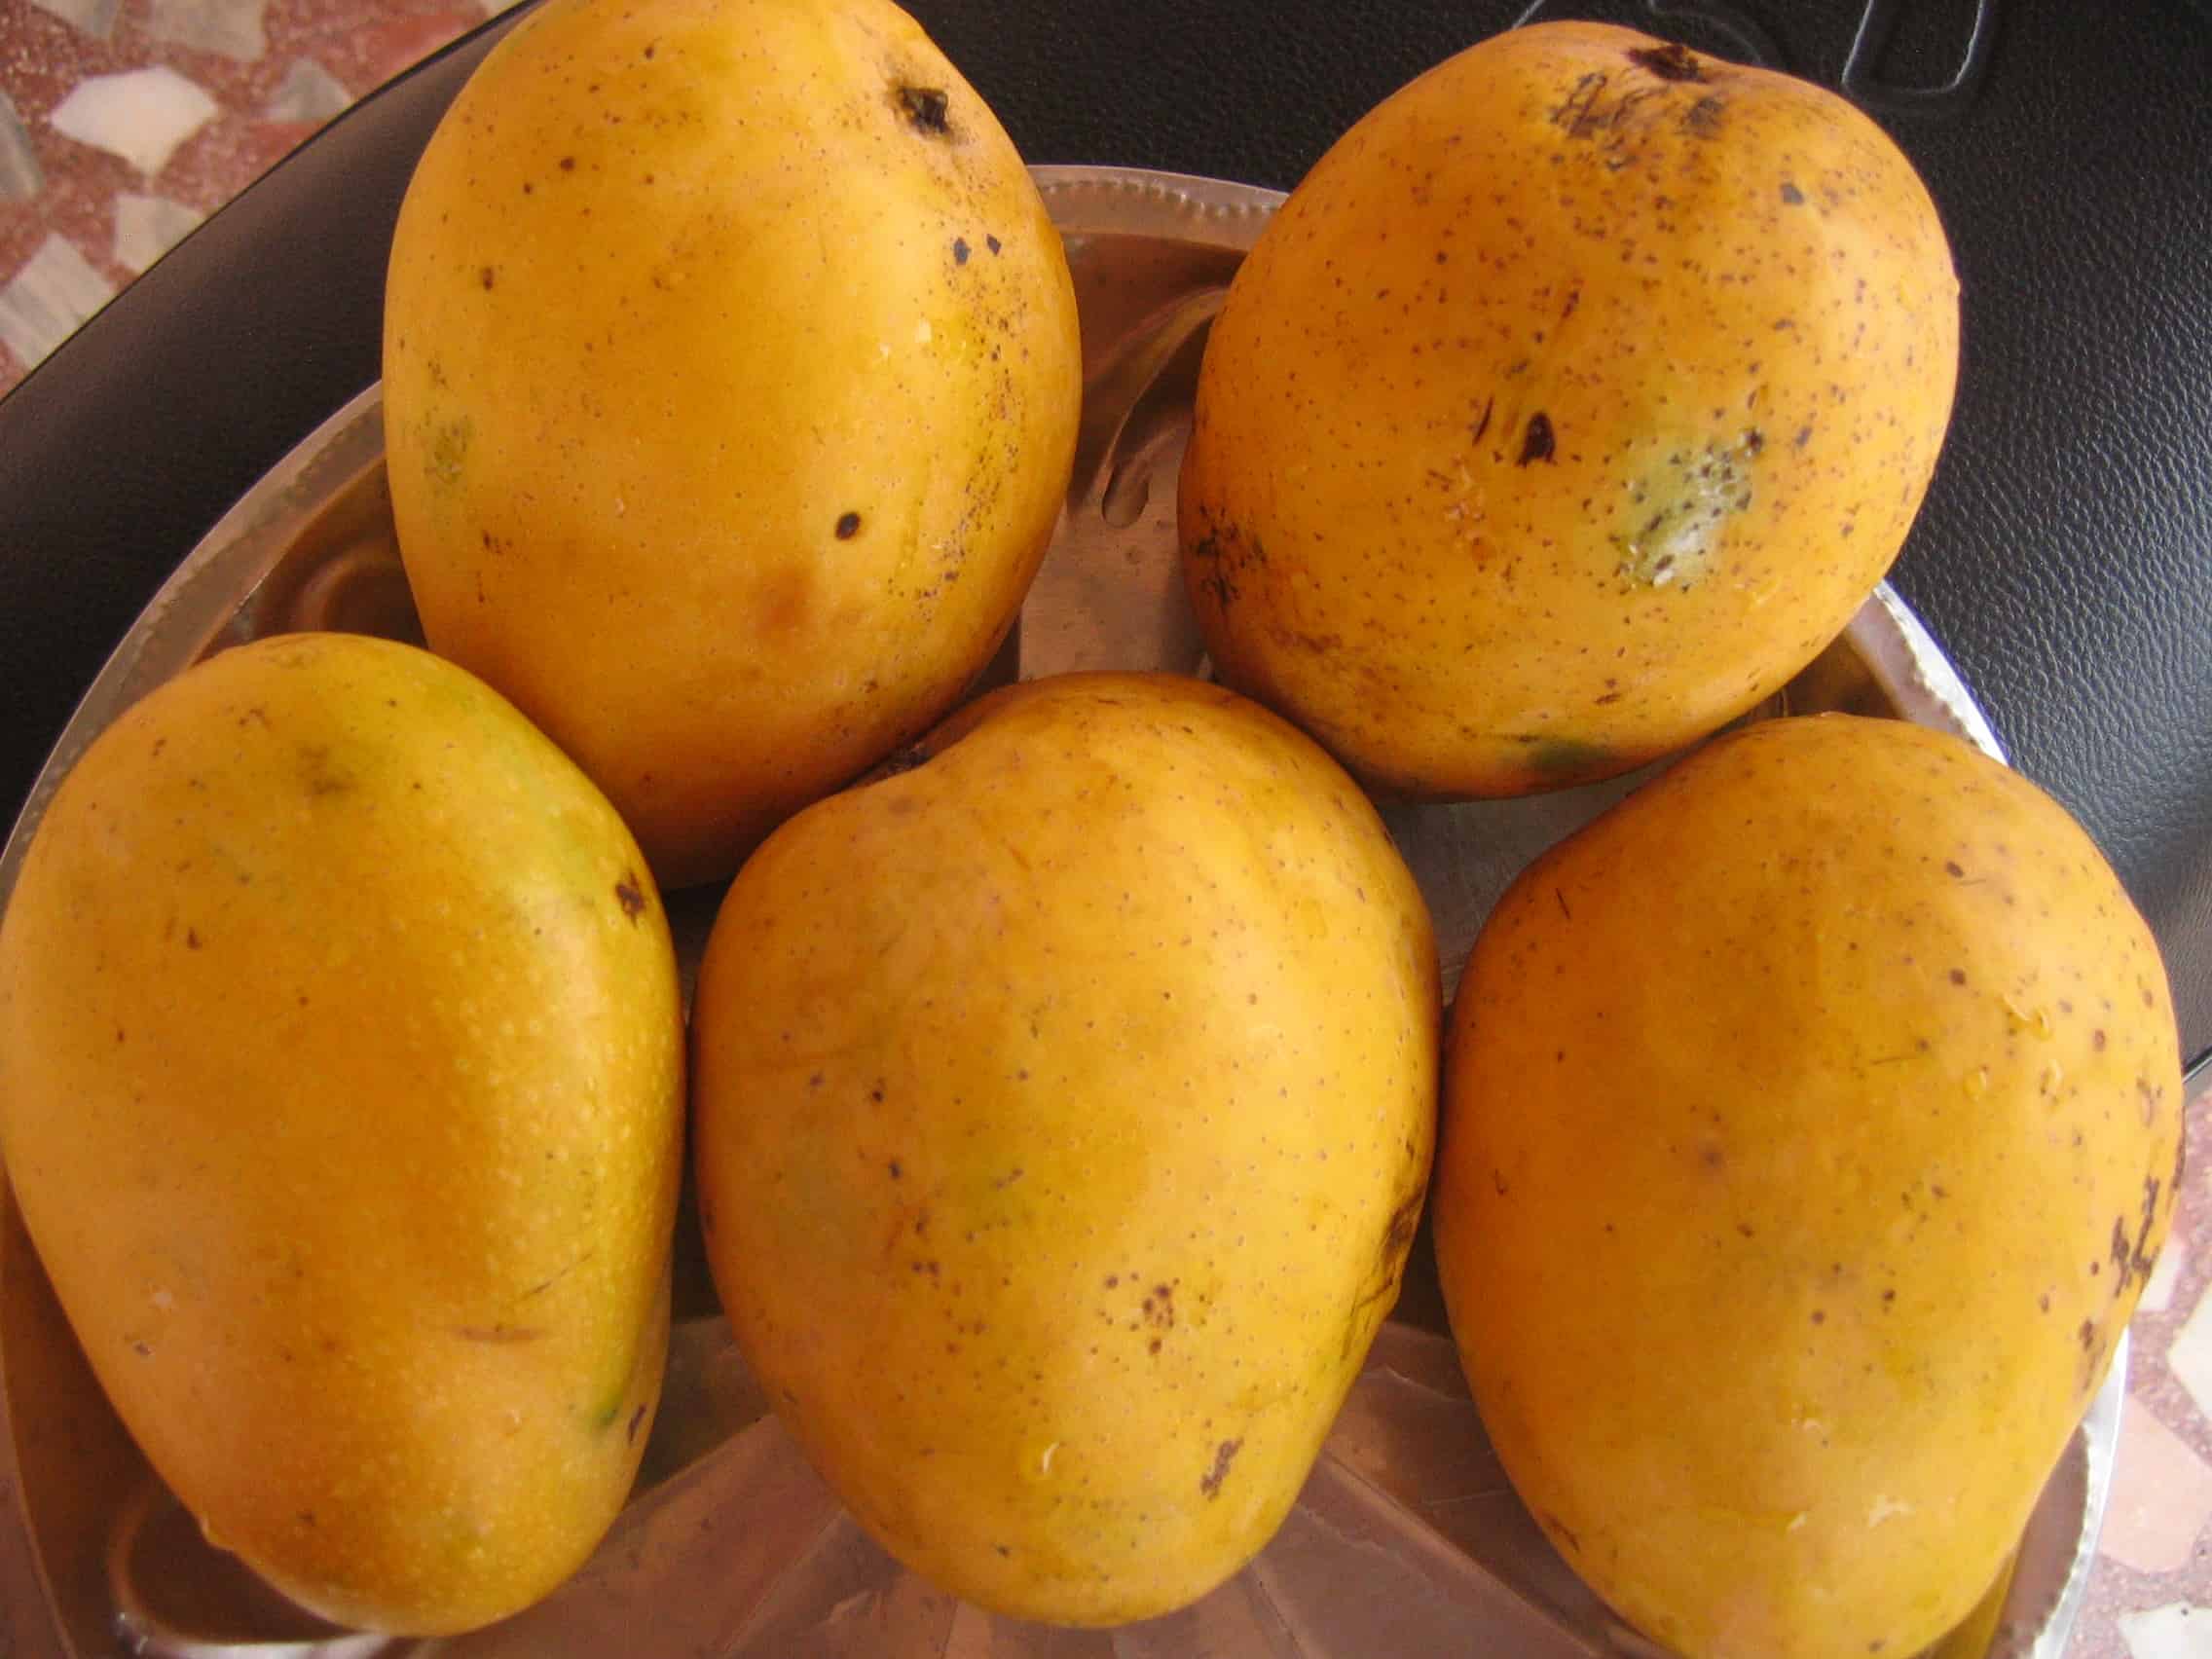 The Hunt for Jamaican Mangoes